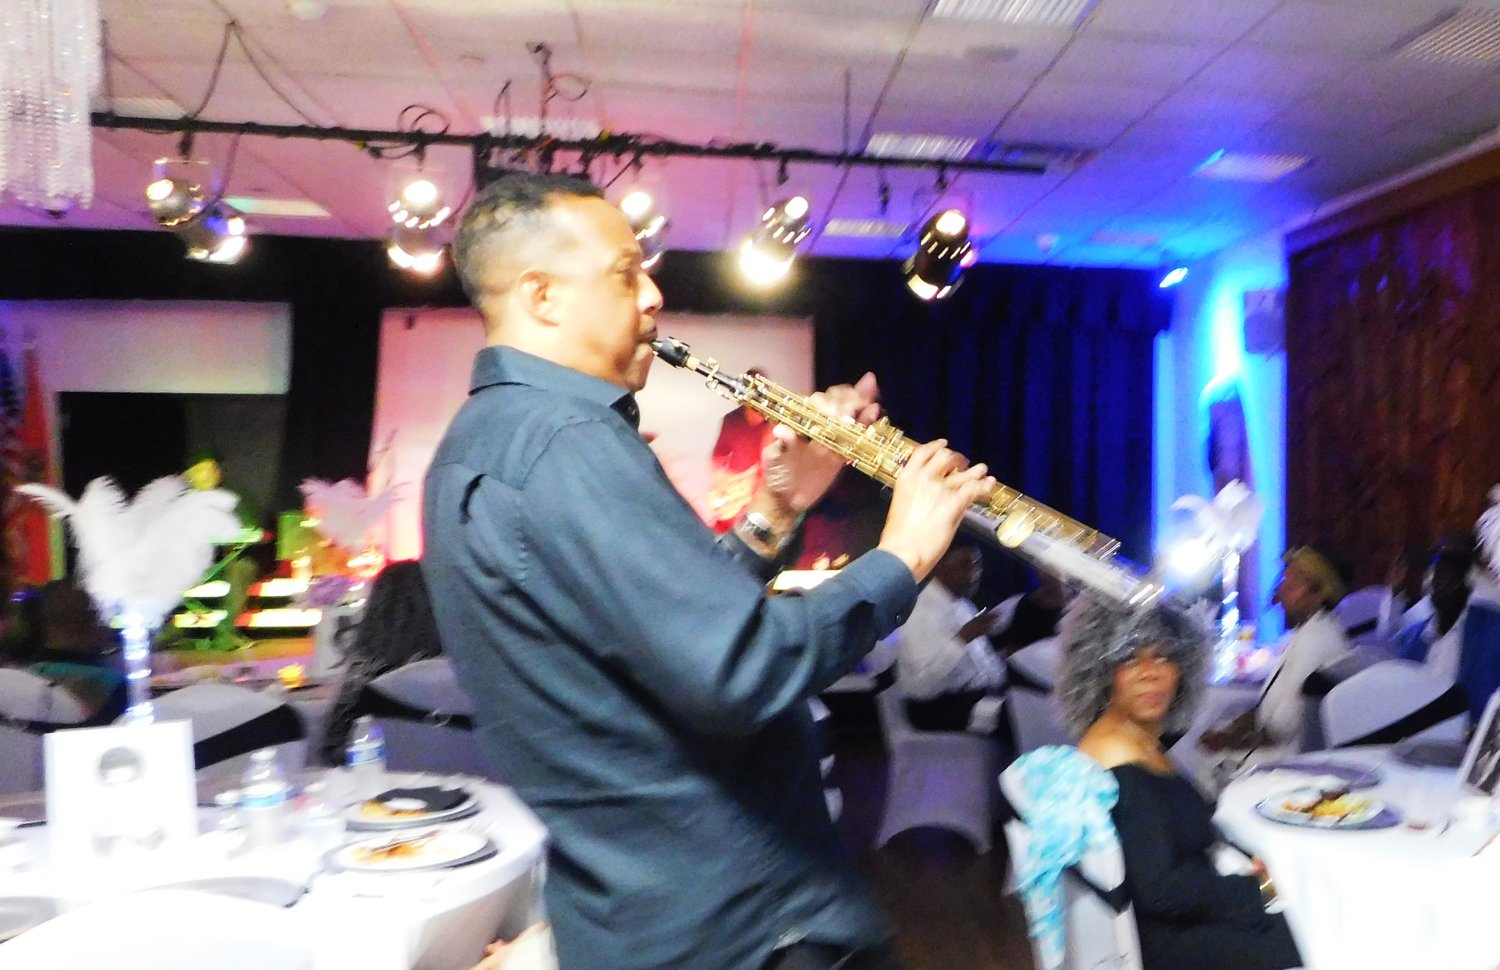 Saxophonist Kirk Bailey and the Next Level band kept the partygoers entertained during dinner.